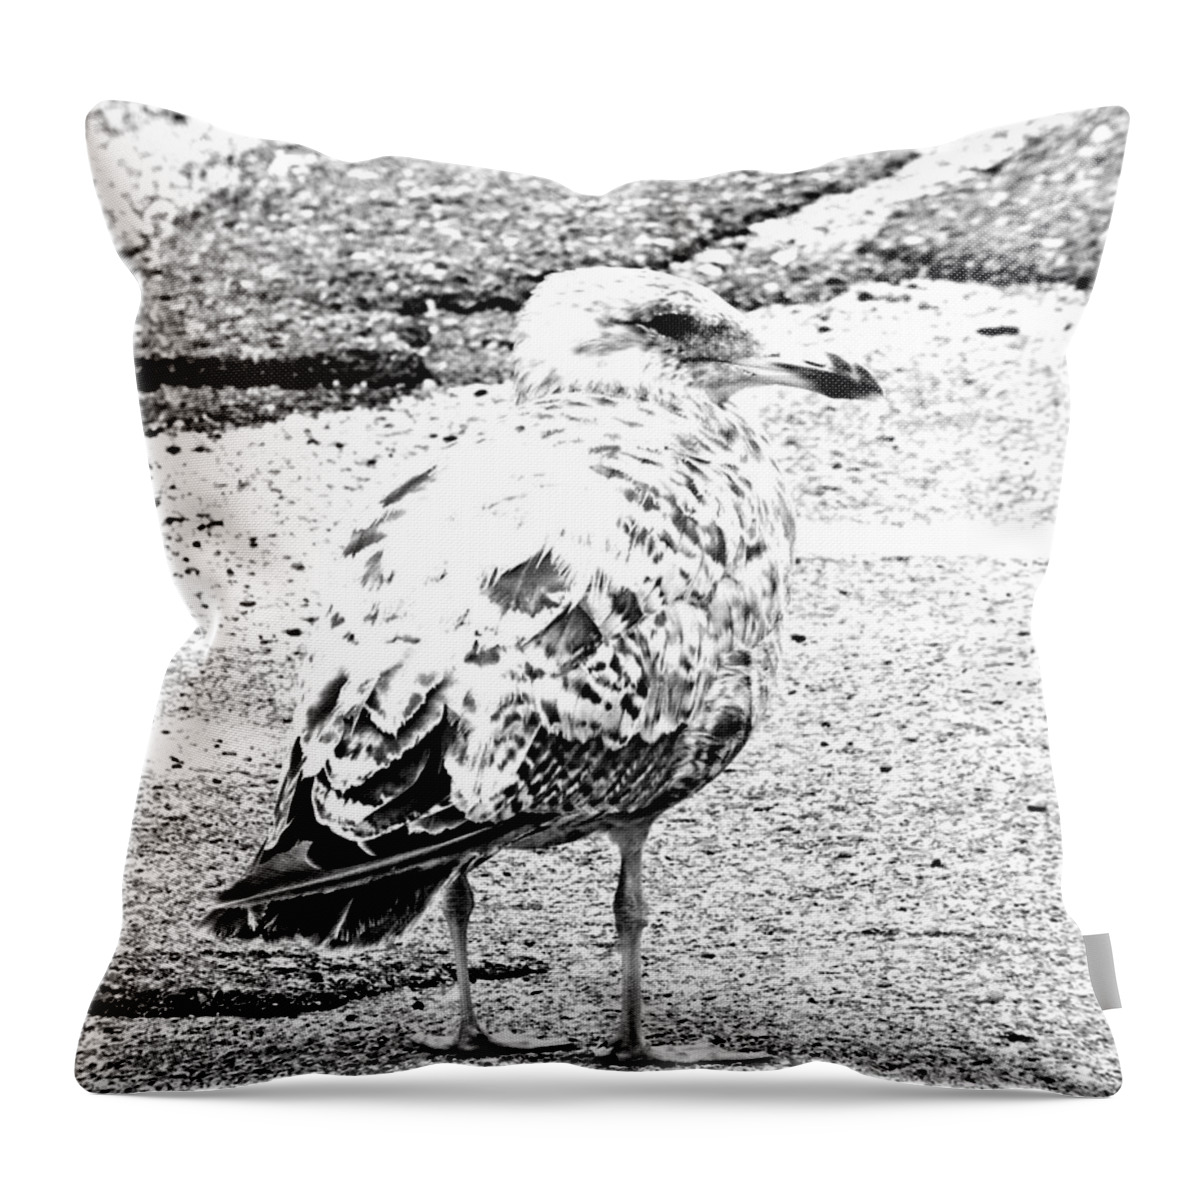 Seagull Throw Pillow featuring the photograph Jeffrey Cleverly Disguised as a Road by Lizi Beard-Ward